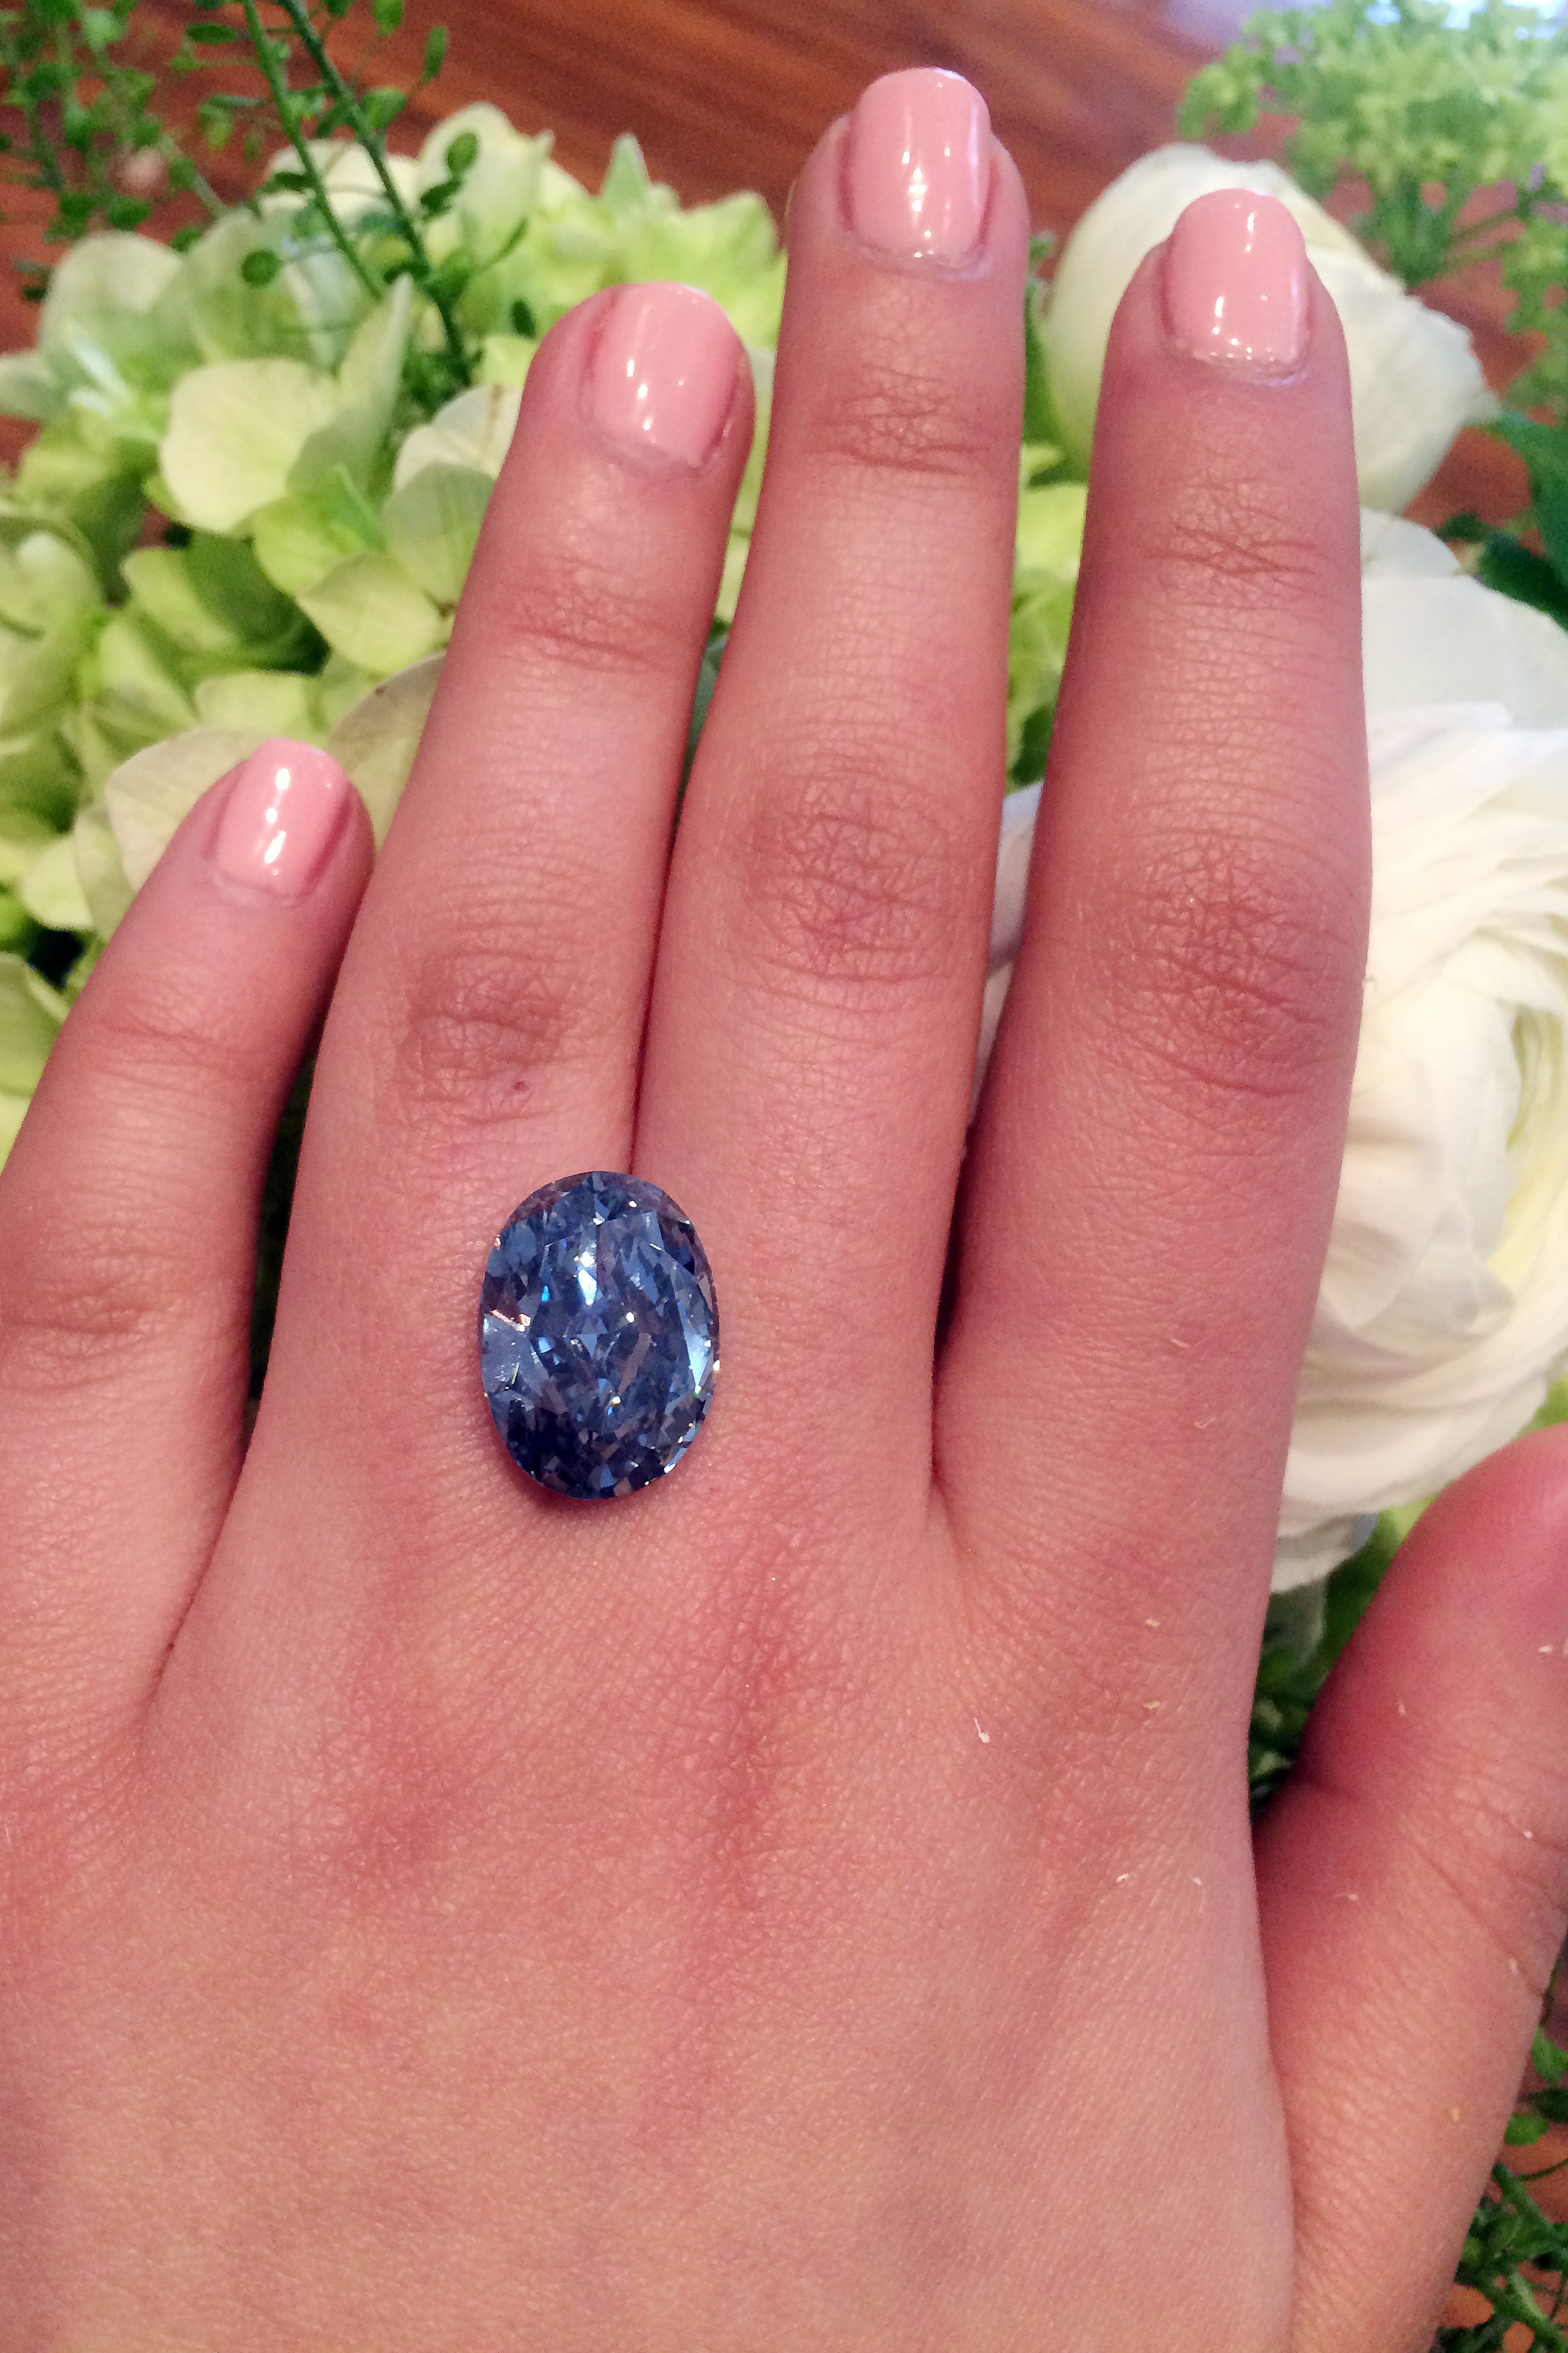 This photo provided by Sotheby's shows a 10.10-carat oval, internally flawless blue diamond. The ‘De Beers Millennium Jewel 4’ is largest oval fancy vivid blue diamond ever to appear at auction.